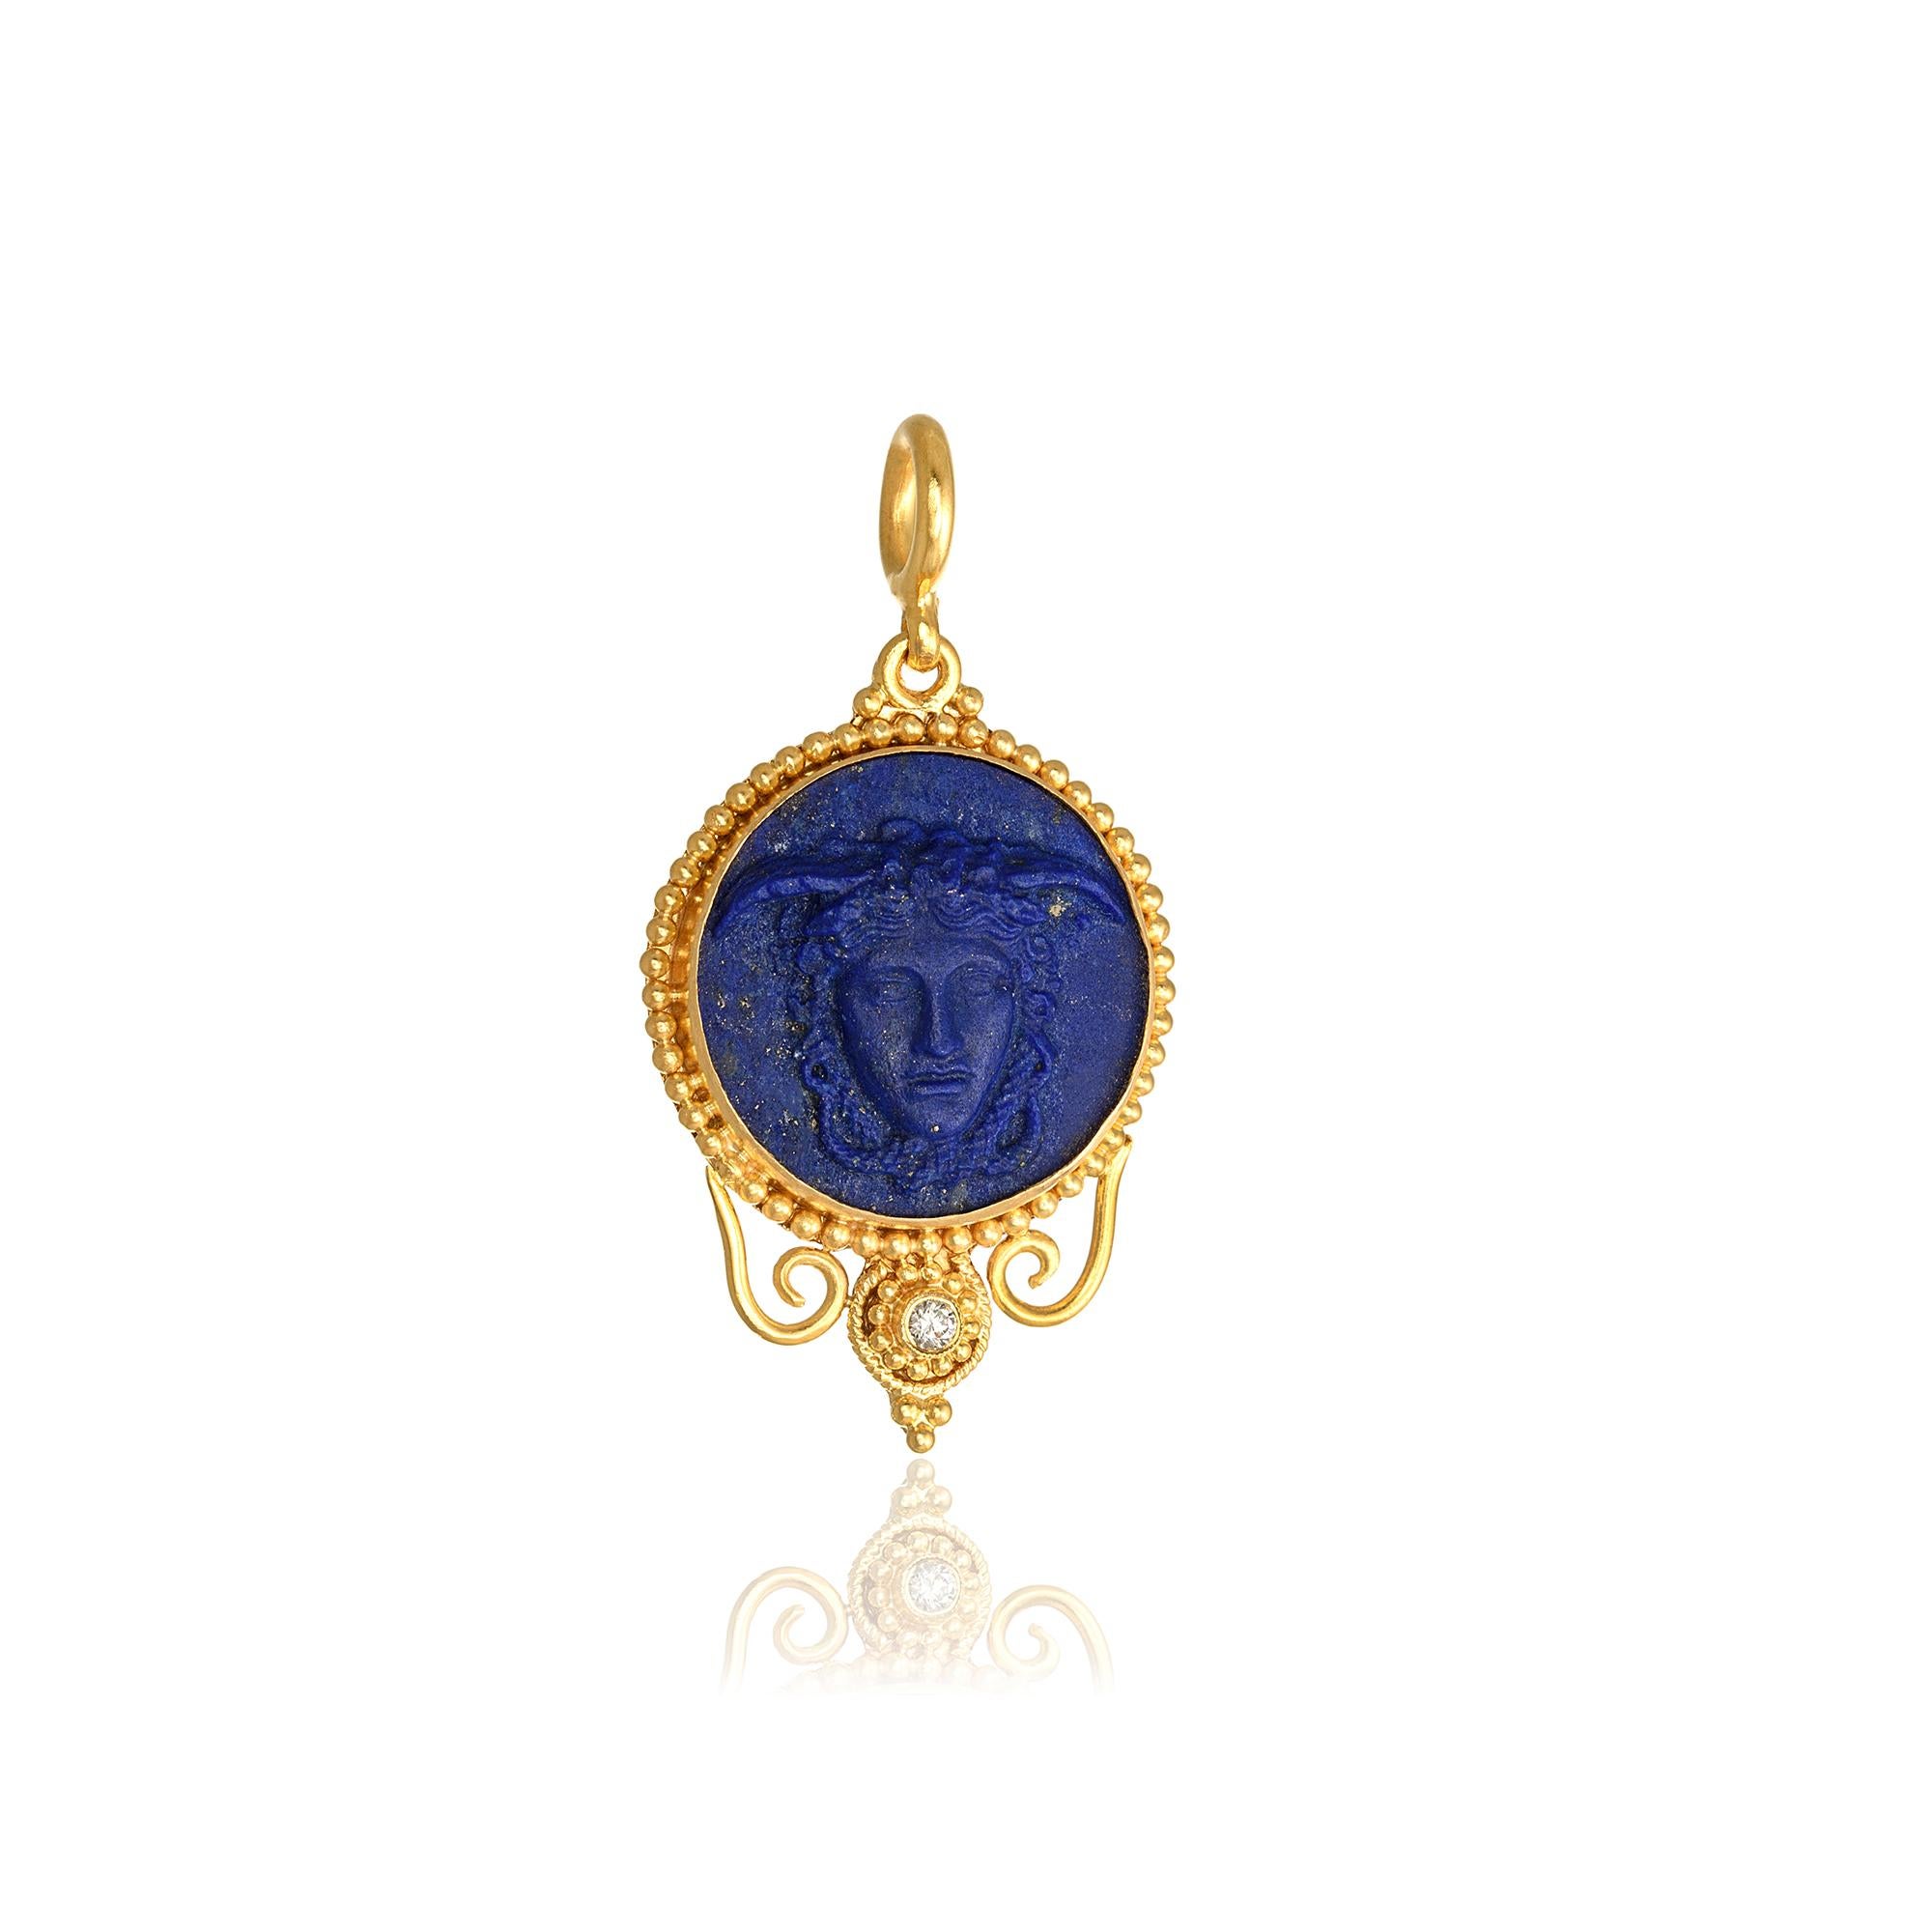 Medusa Head round Pendant handcrafted in 22Kt yellow gold, featuring a carved Lapis Lazuli center and a brilliant cut diamond. Inspired by the ancient greek mythology and Perseus's accomplishments, Nicofilimon created this jewelry masterpiece